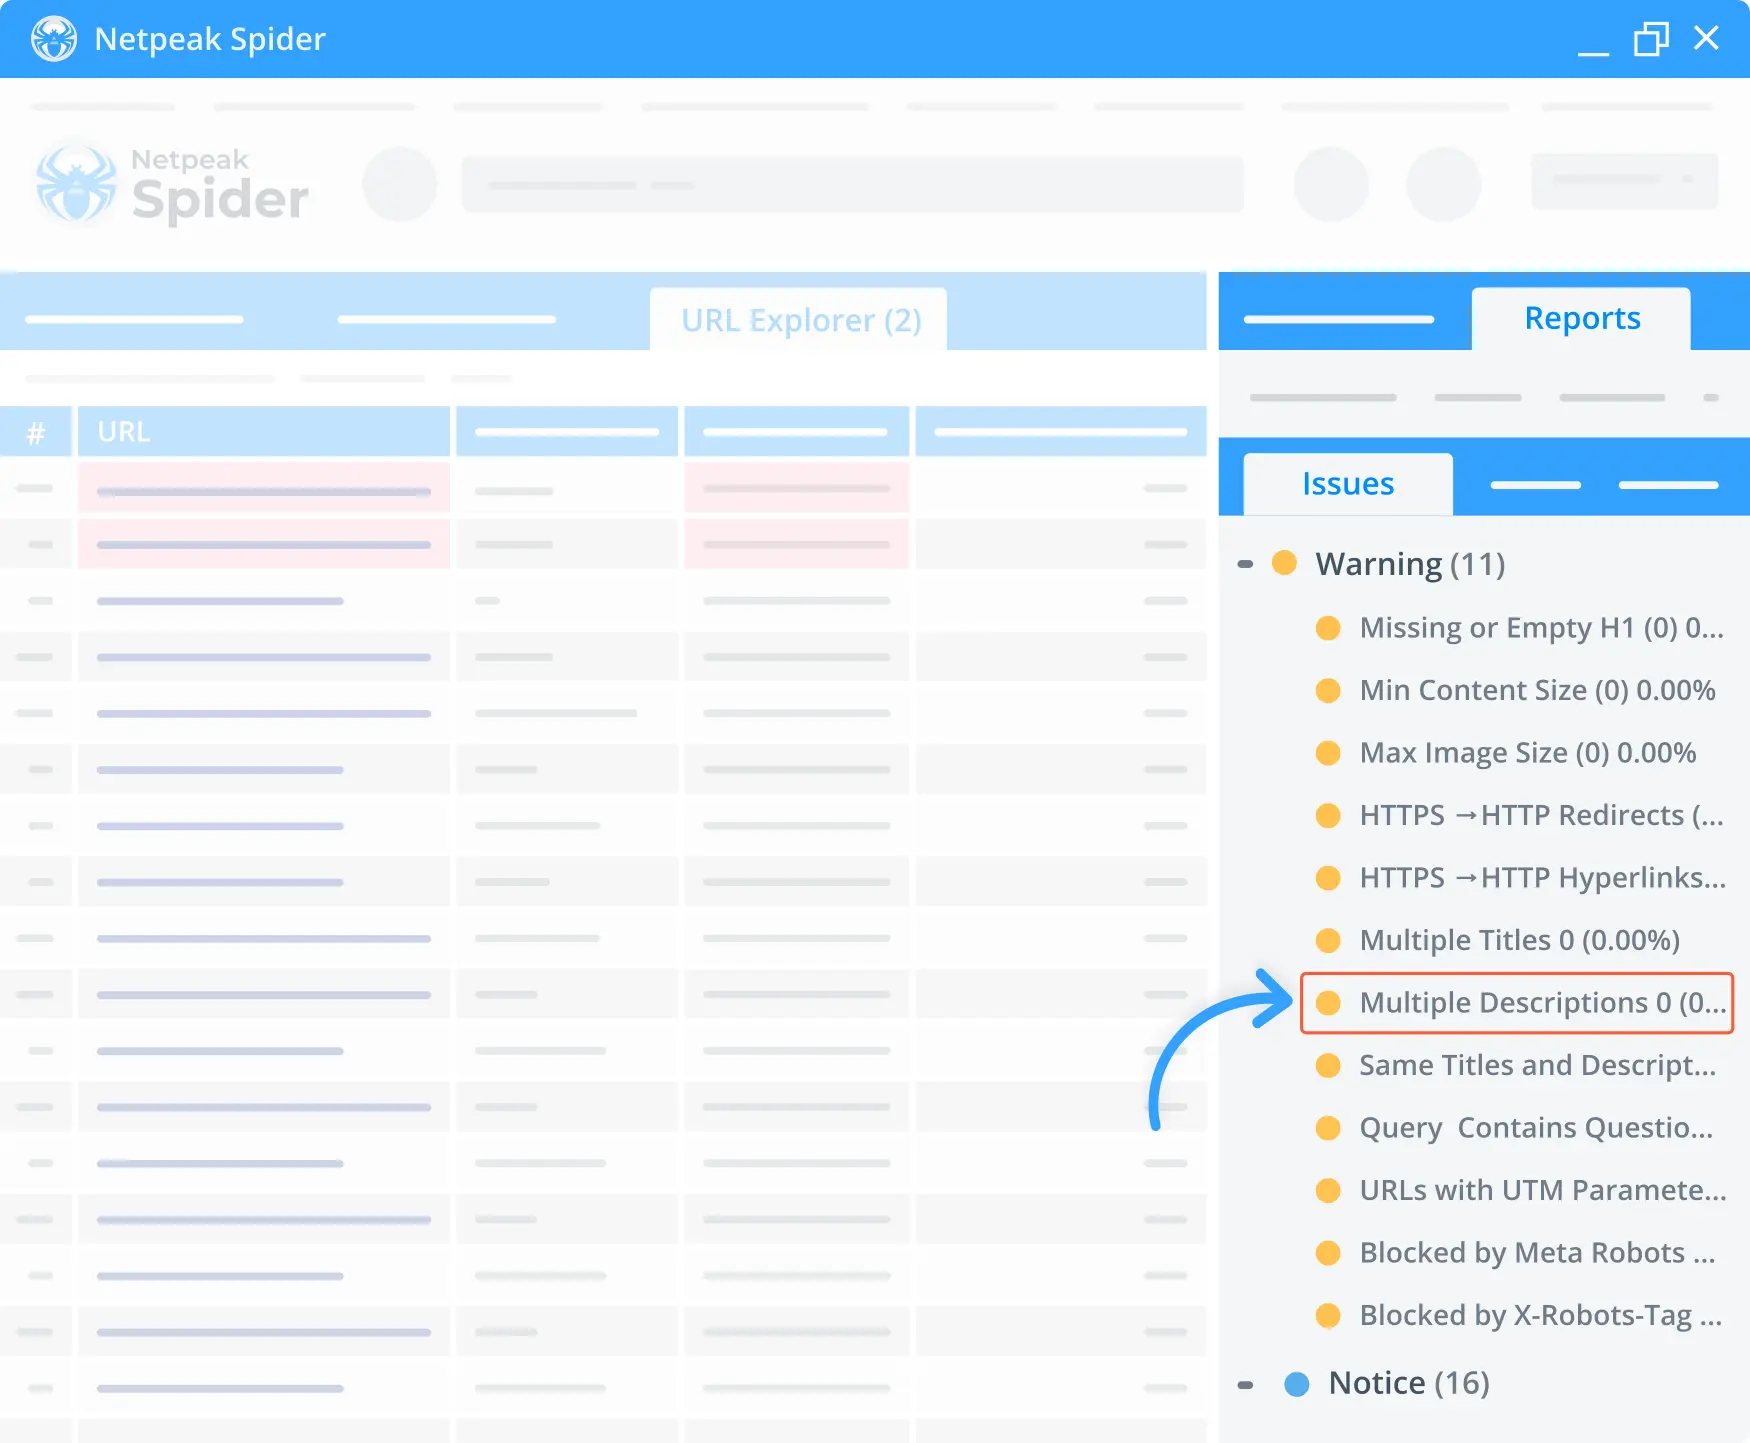 Detect multiple descriptions within one page with Netpeak Spider